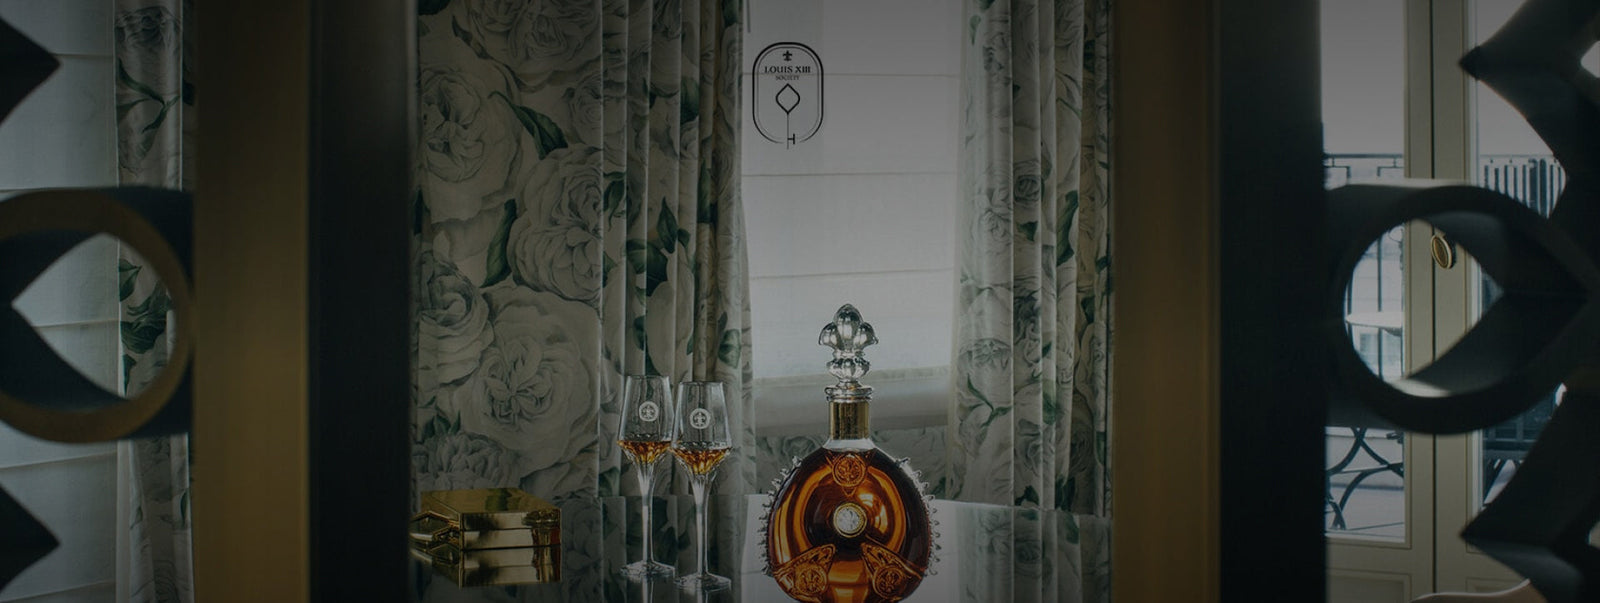 A dimmed lifestyle photo of a LOUIS XIII decanter and two filled crystal glasses on a piano